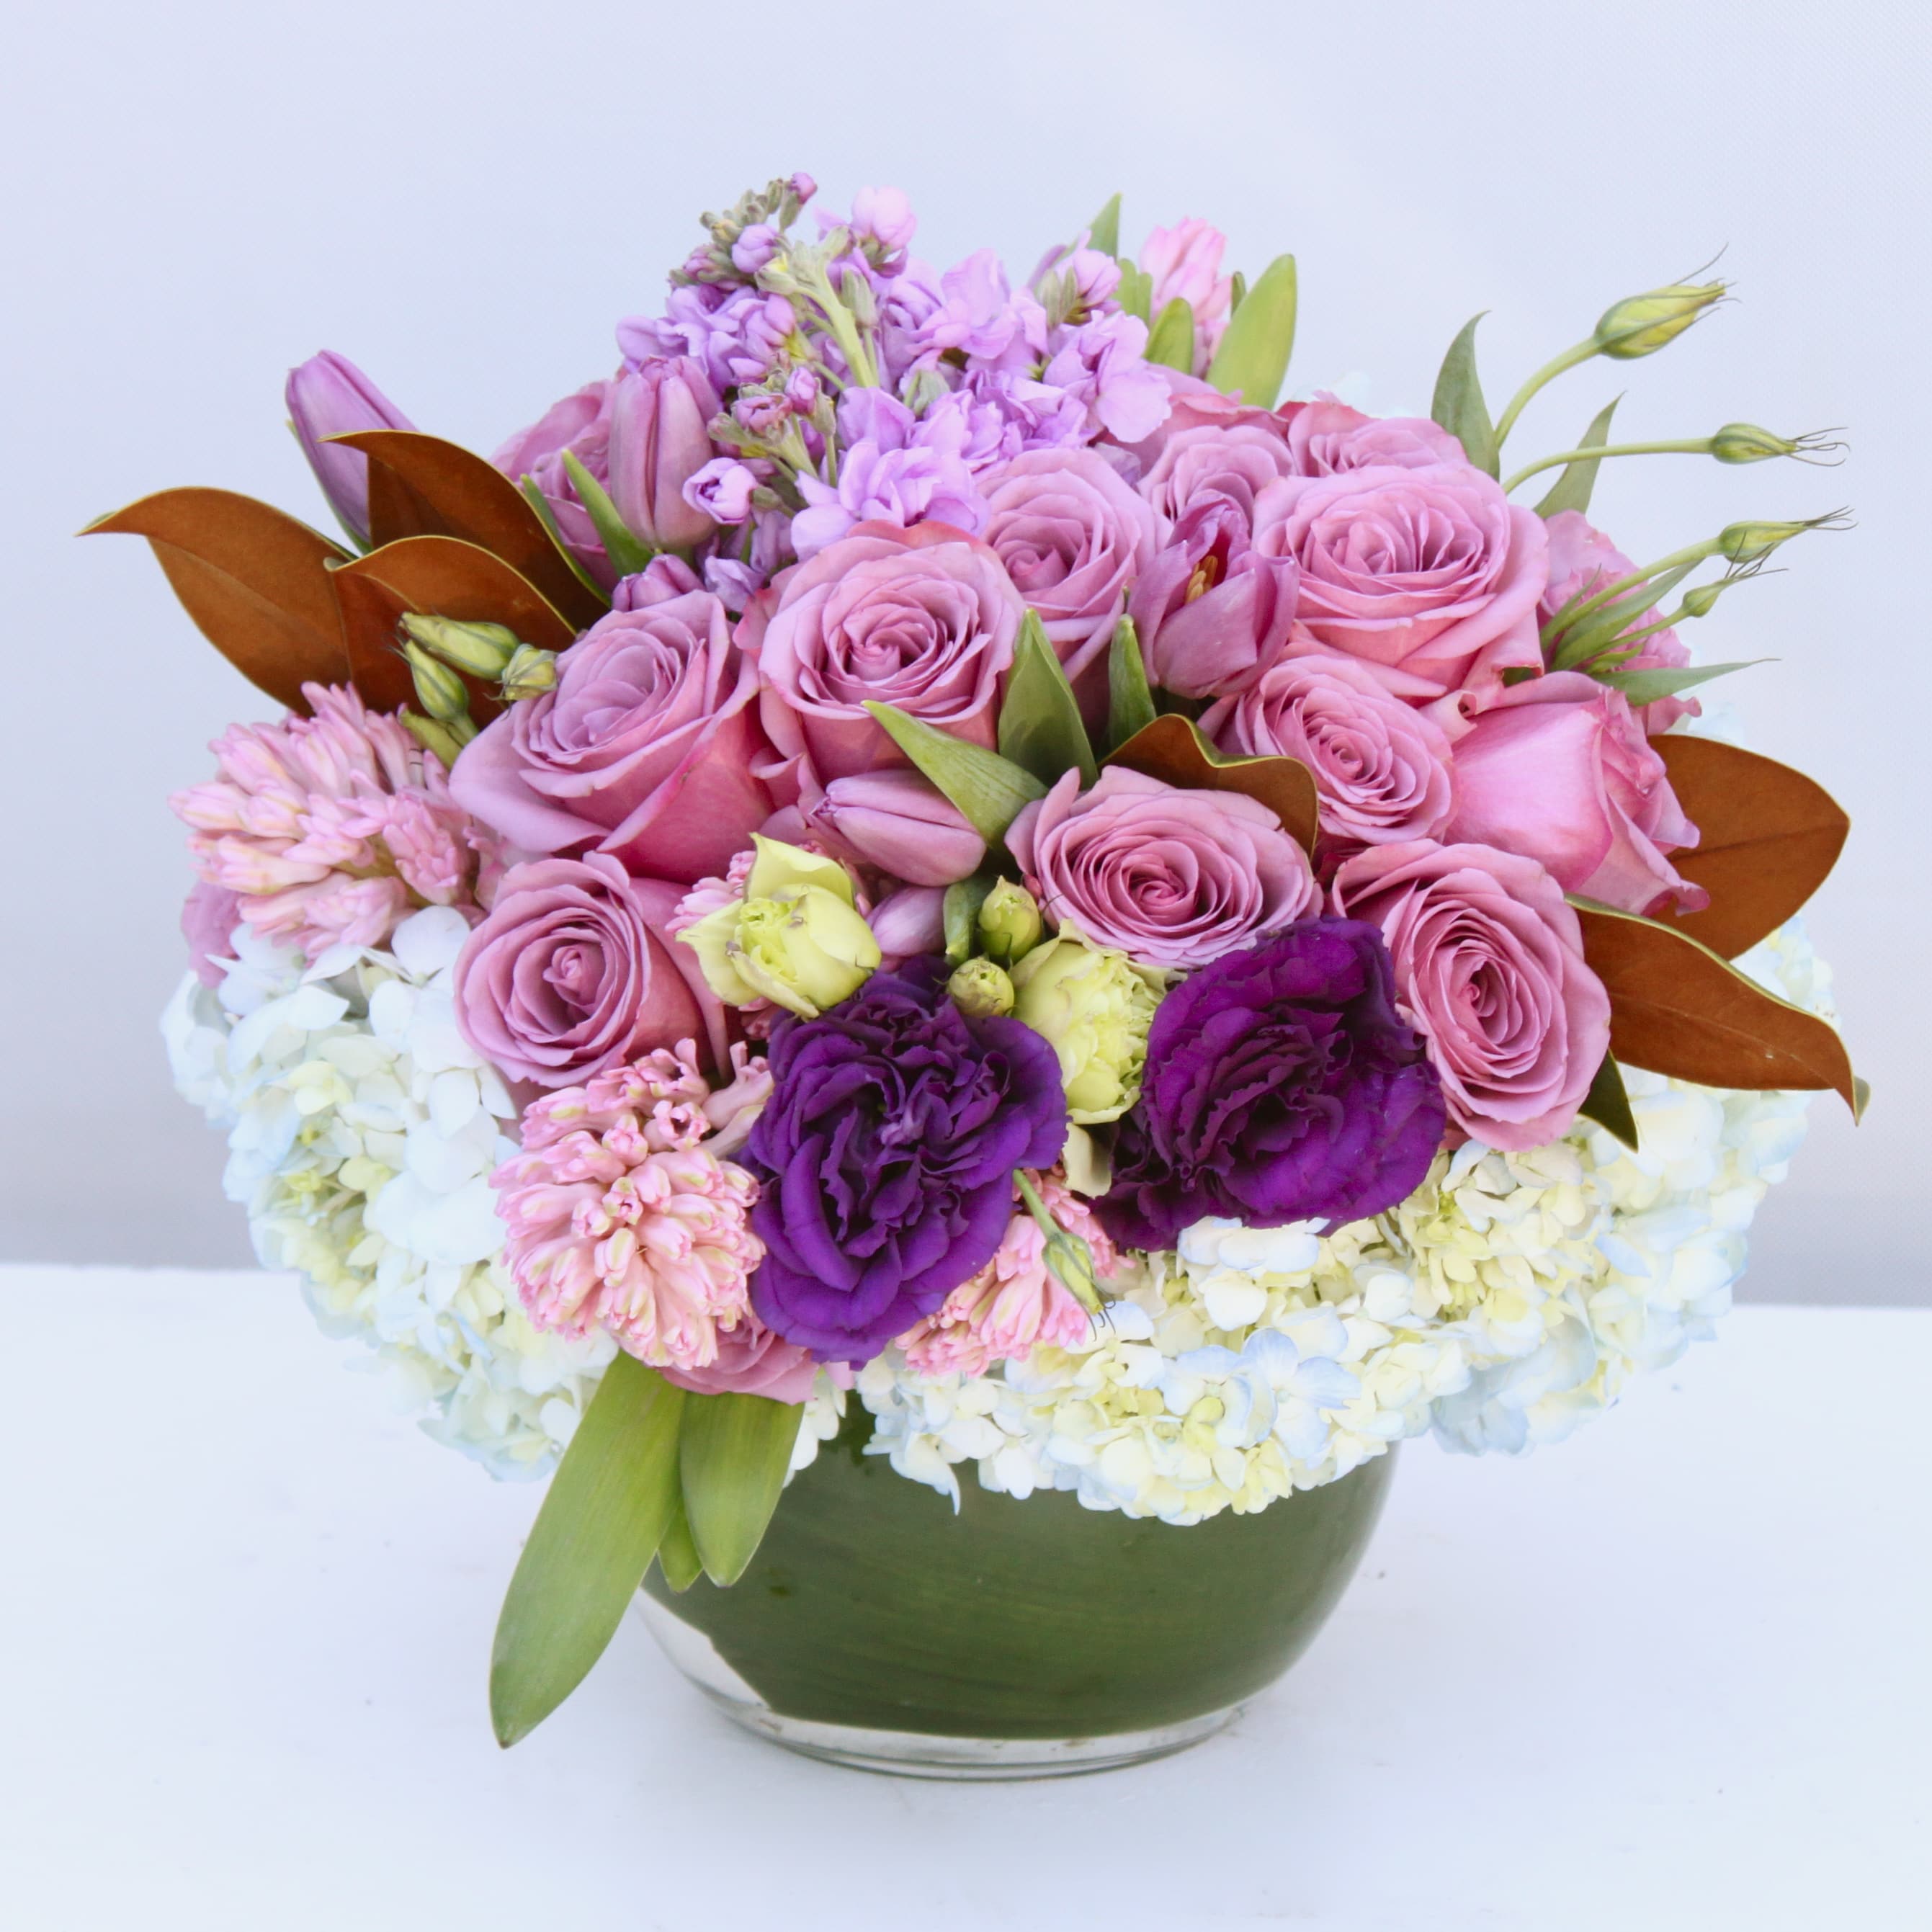 Chic &amp; Sleek - Baby-blue Hydrangeas, purple Lisianthus flowers, lavender Hyacinths and Hydrangeas, purple Tulips, Roses and Stock in a short glass bowl. The deep purple hues and bright-colored accents make this a perfect gift for someone you love this spring. 